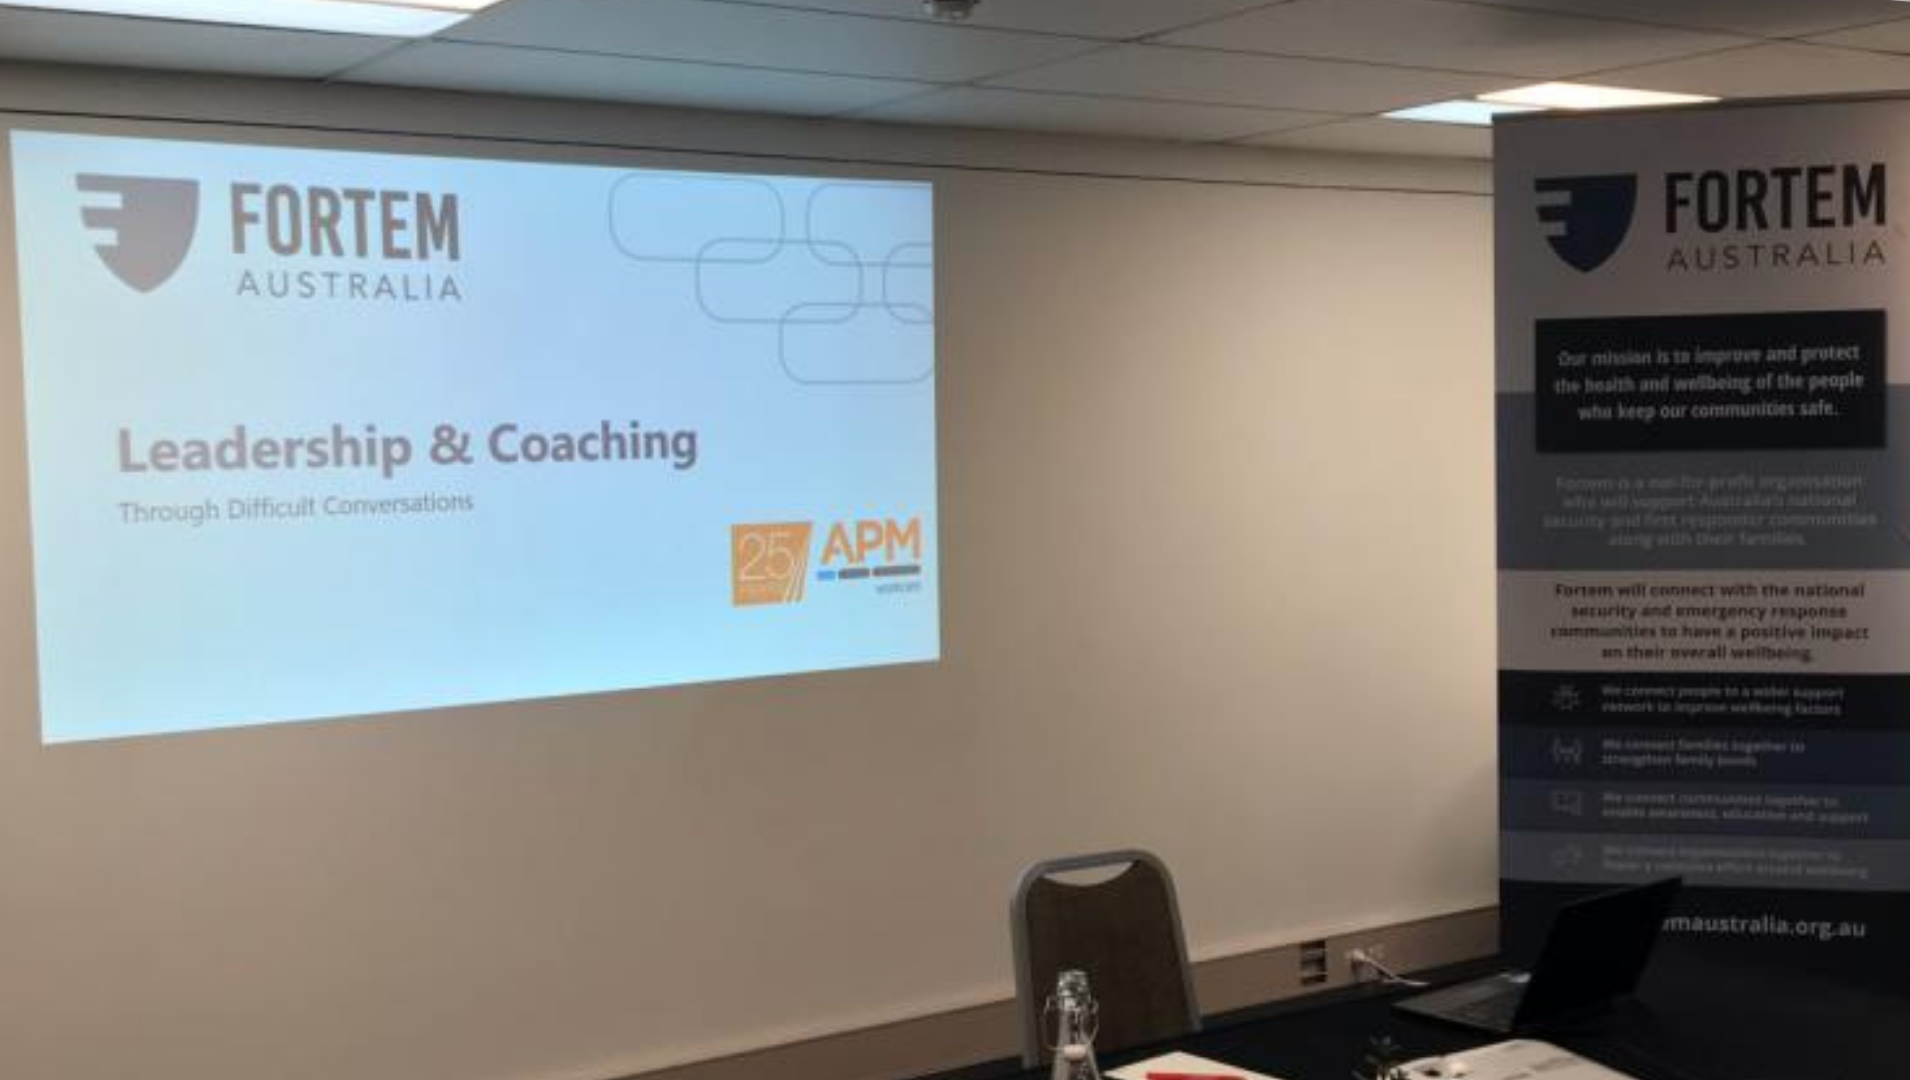 Photo of the opening slide from the Fortem and APM WorkCare training session